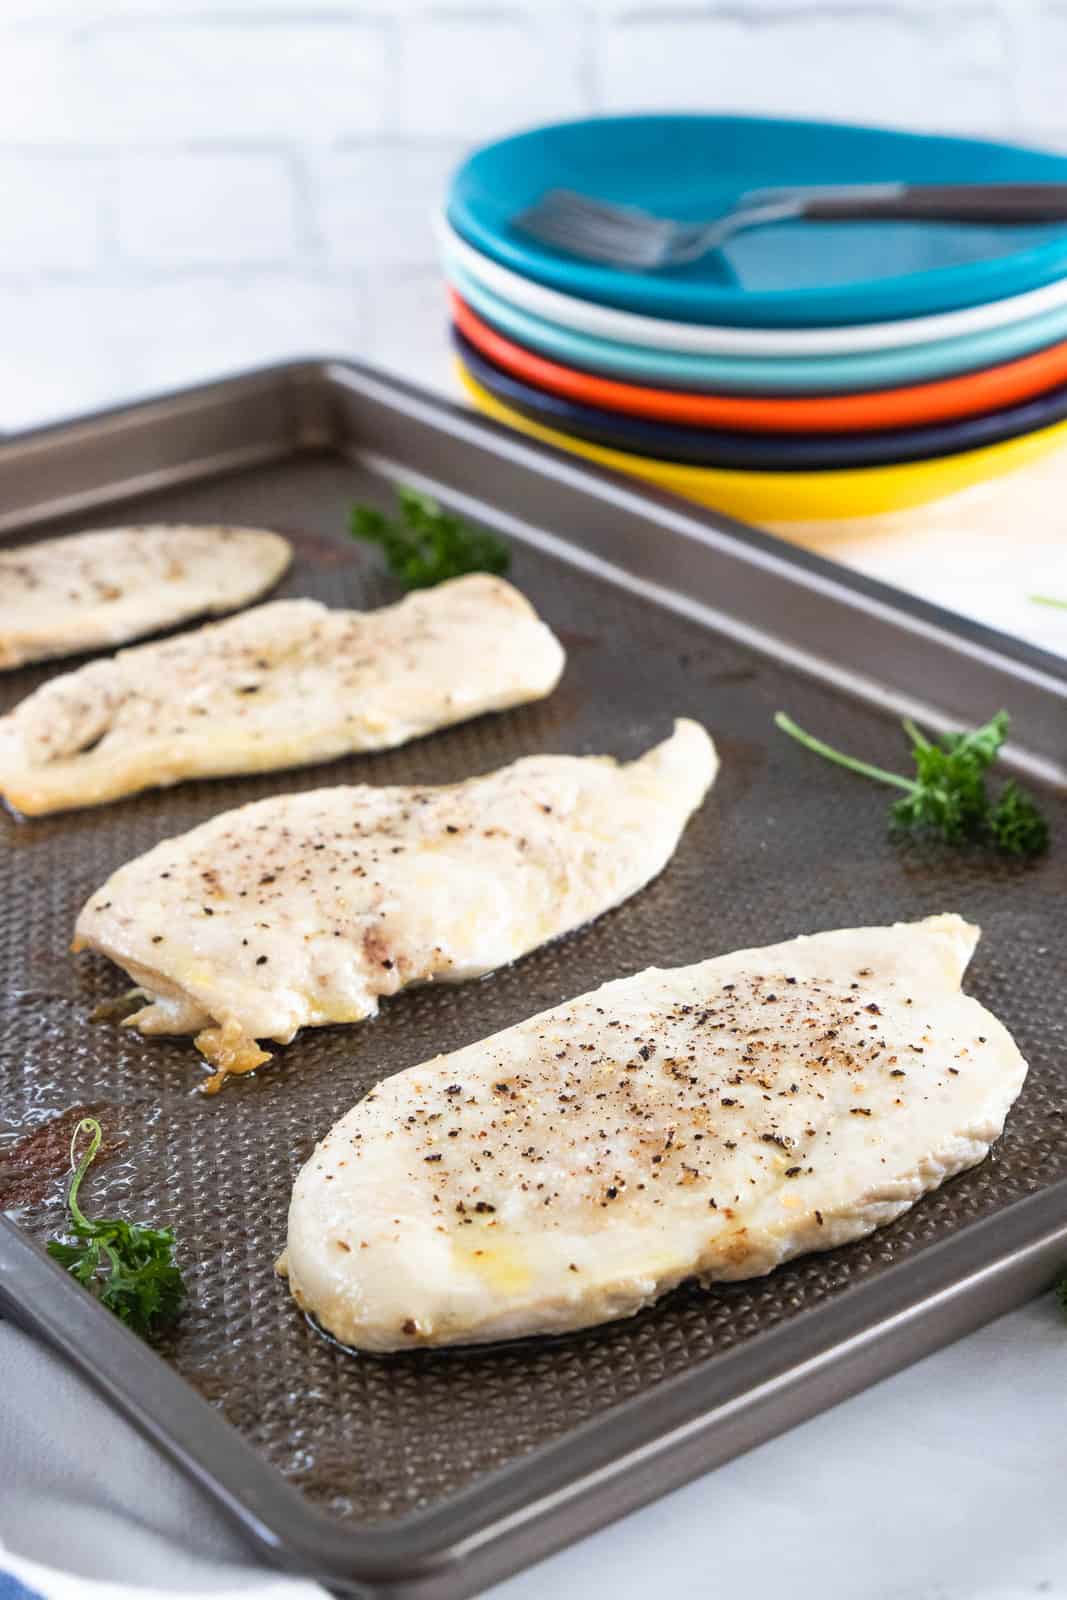 Thin sliced chicken breasts being shown on a baking sheet.